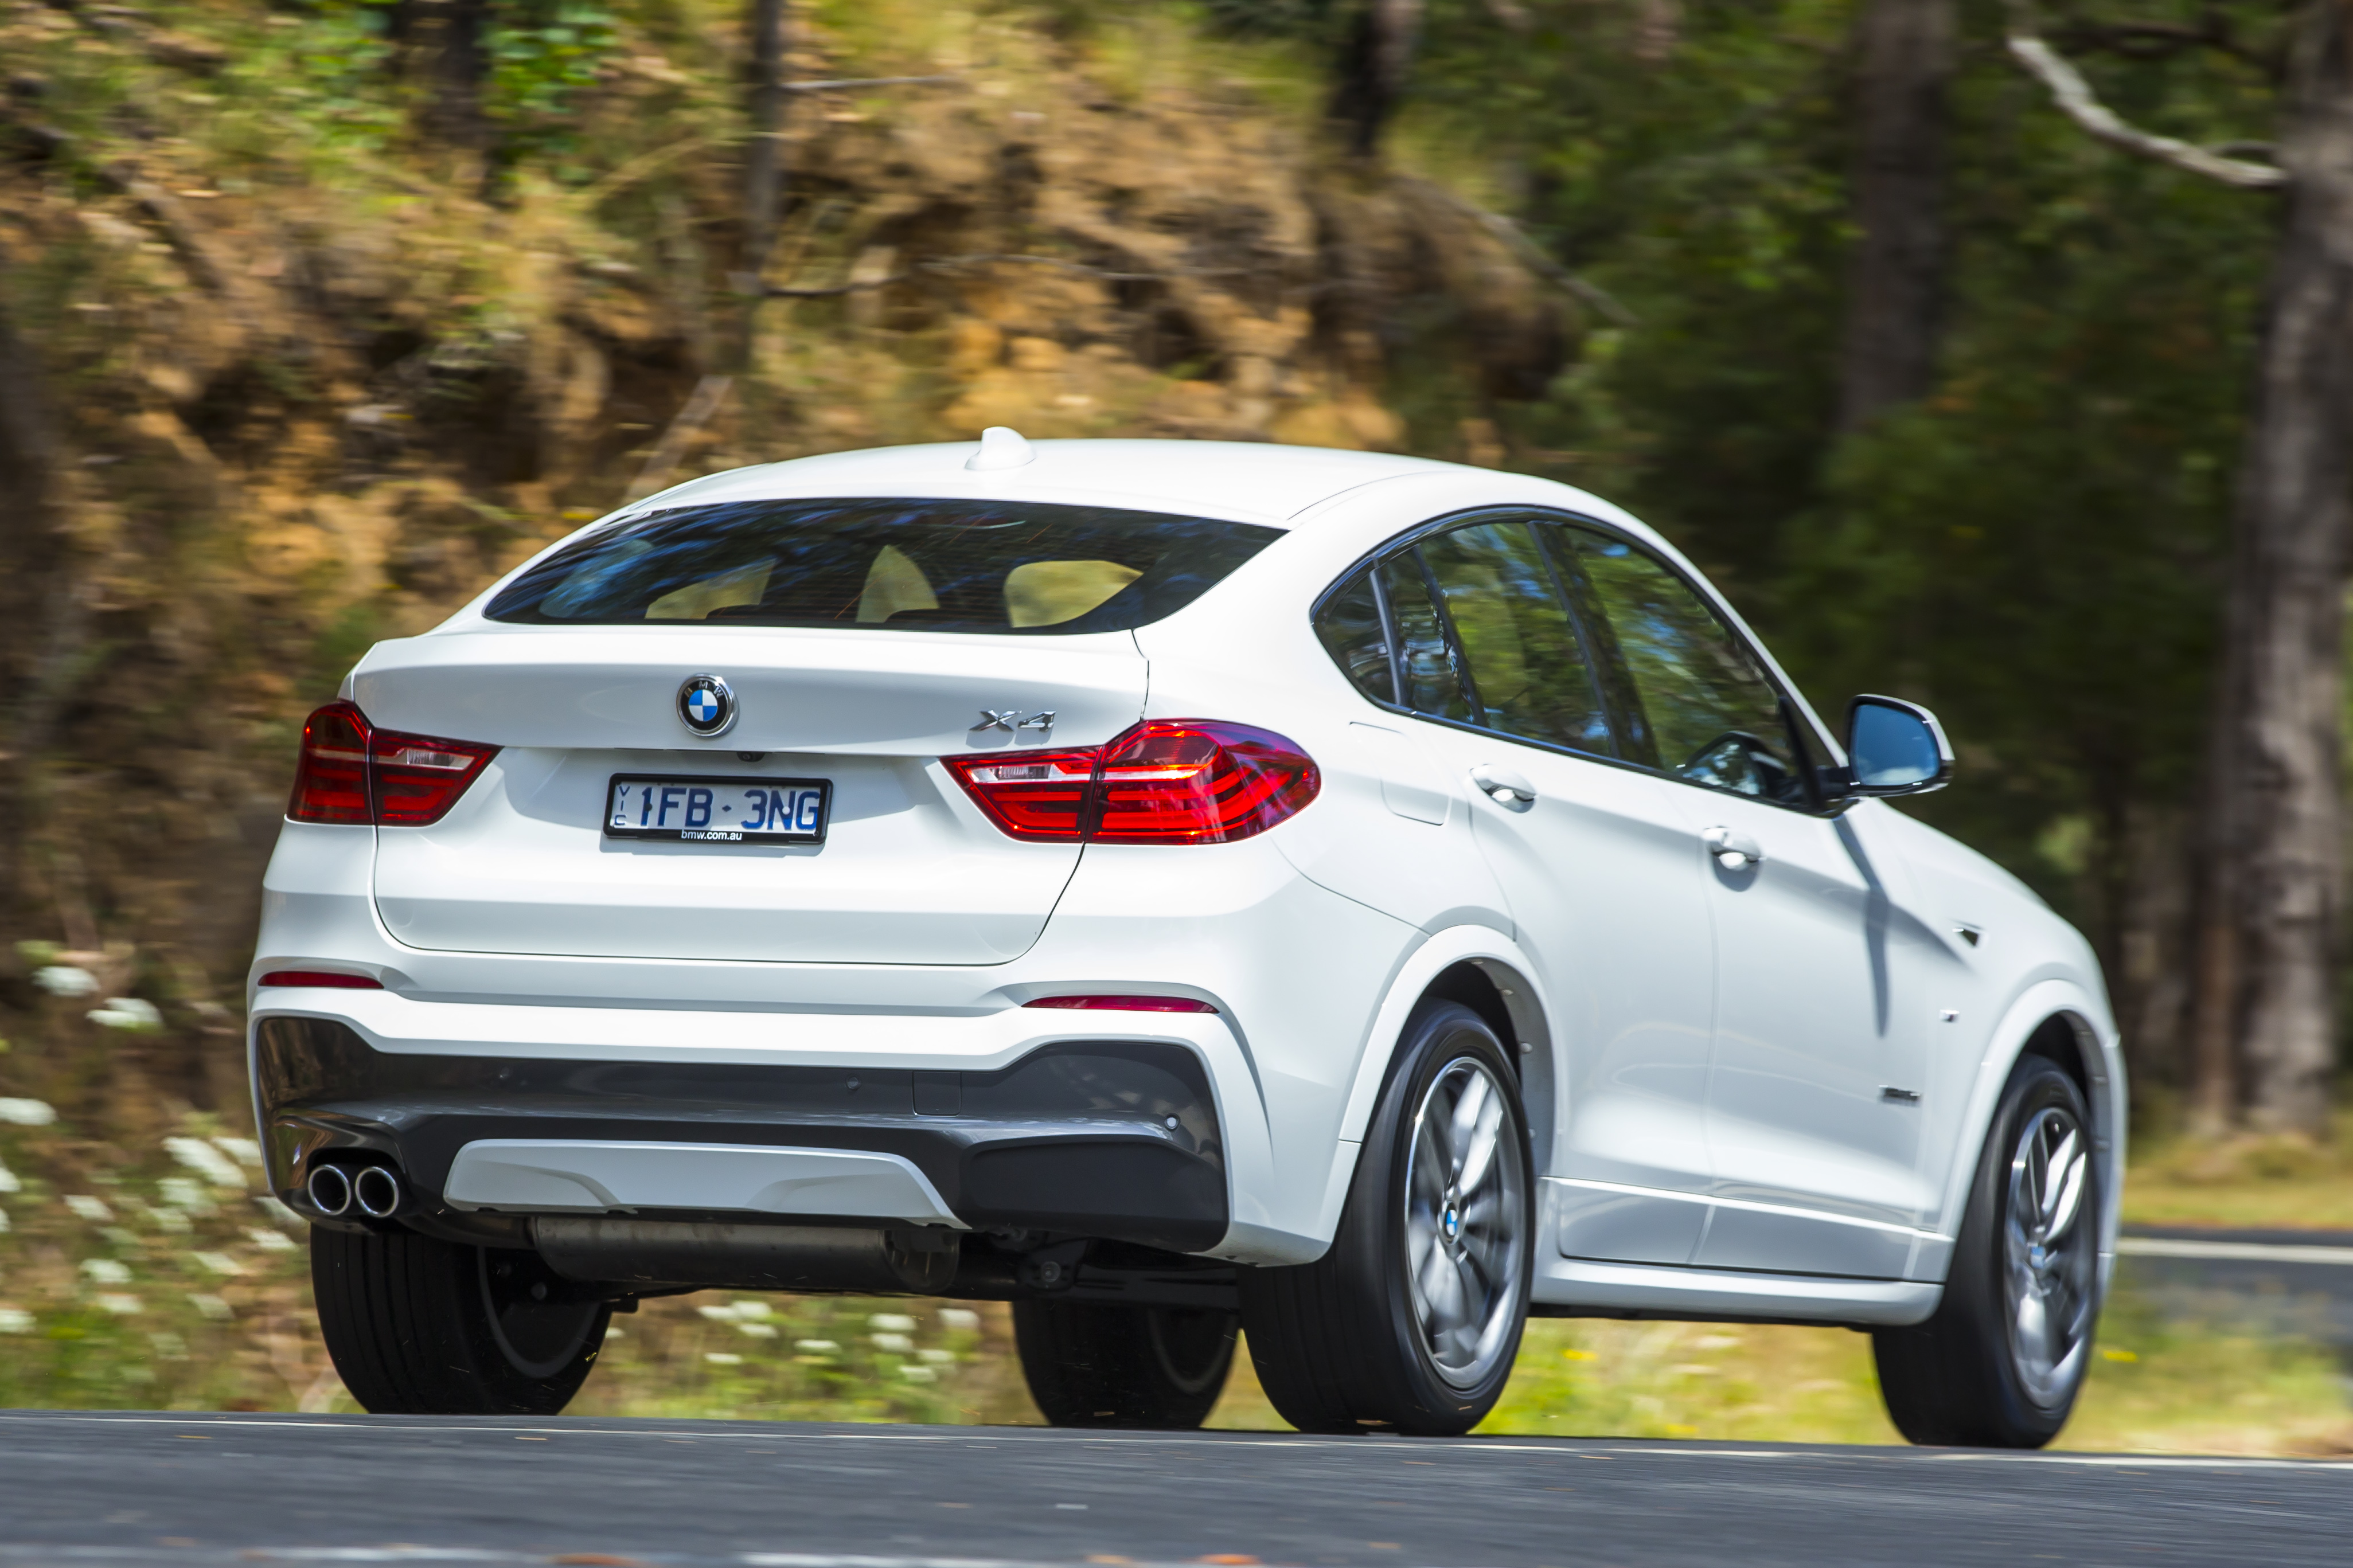 2016 BMW X4 xDrive35d Review | CarAdvice